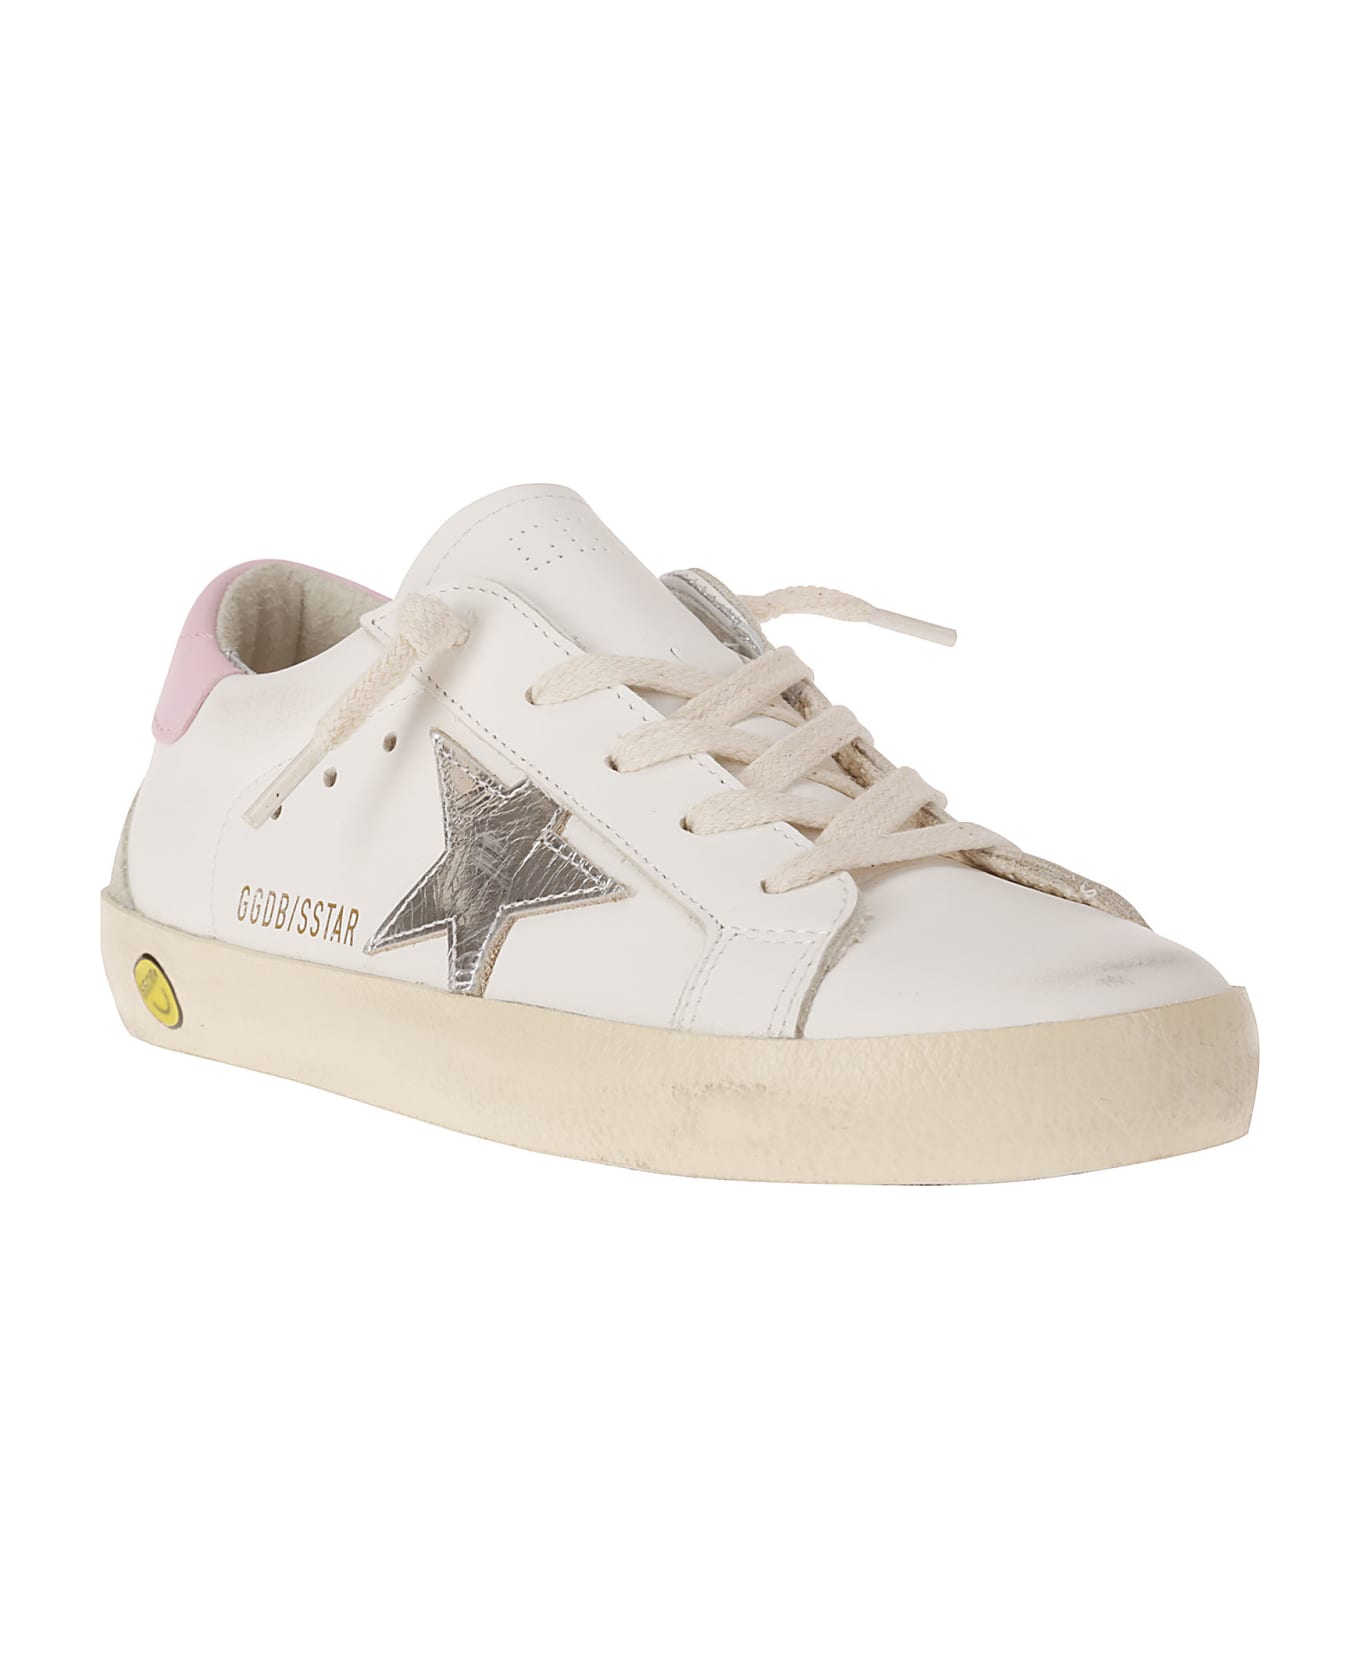 Golden Goose Super-star Leather Upper And Heel Laminated Sta - WHITE/SILVER/ICE/ORCHID PINK シューズ